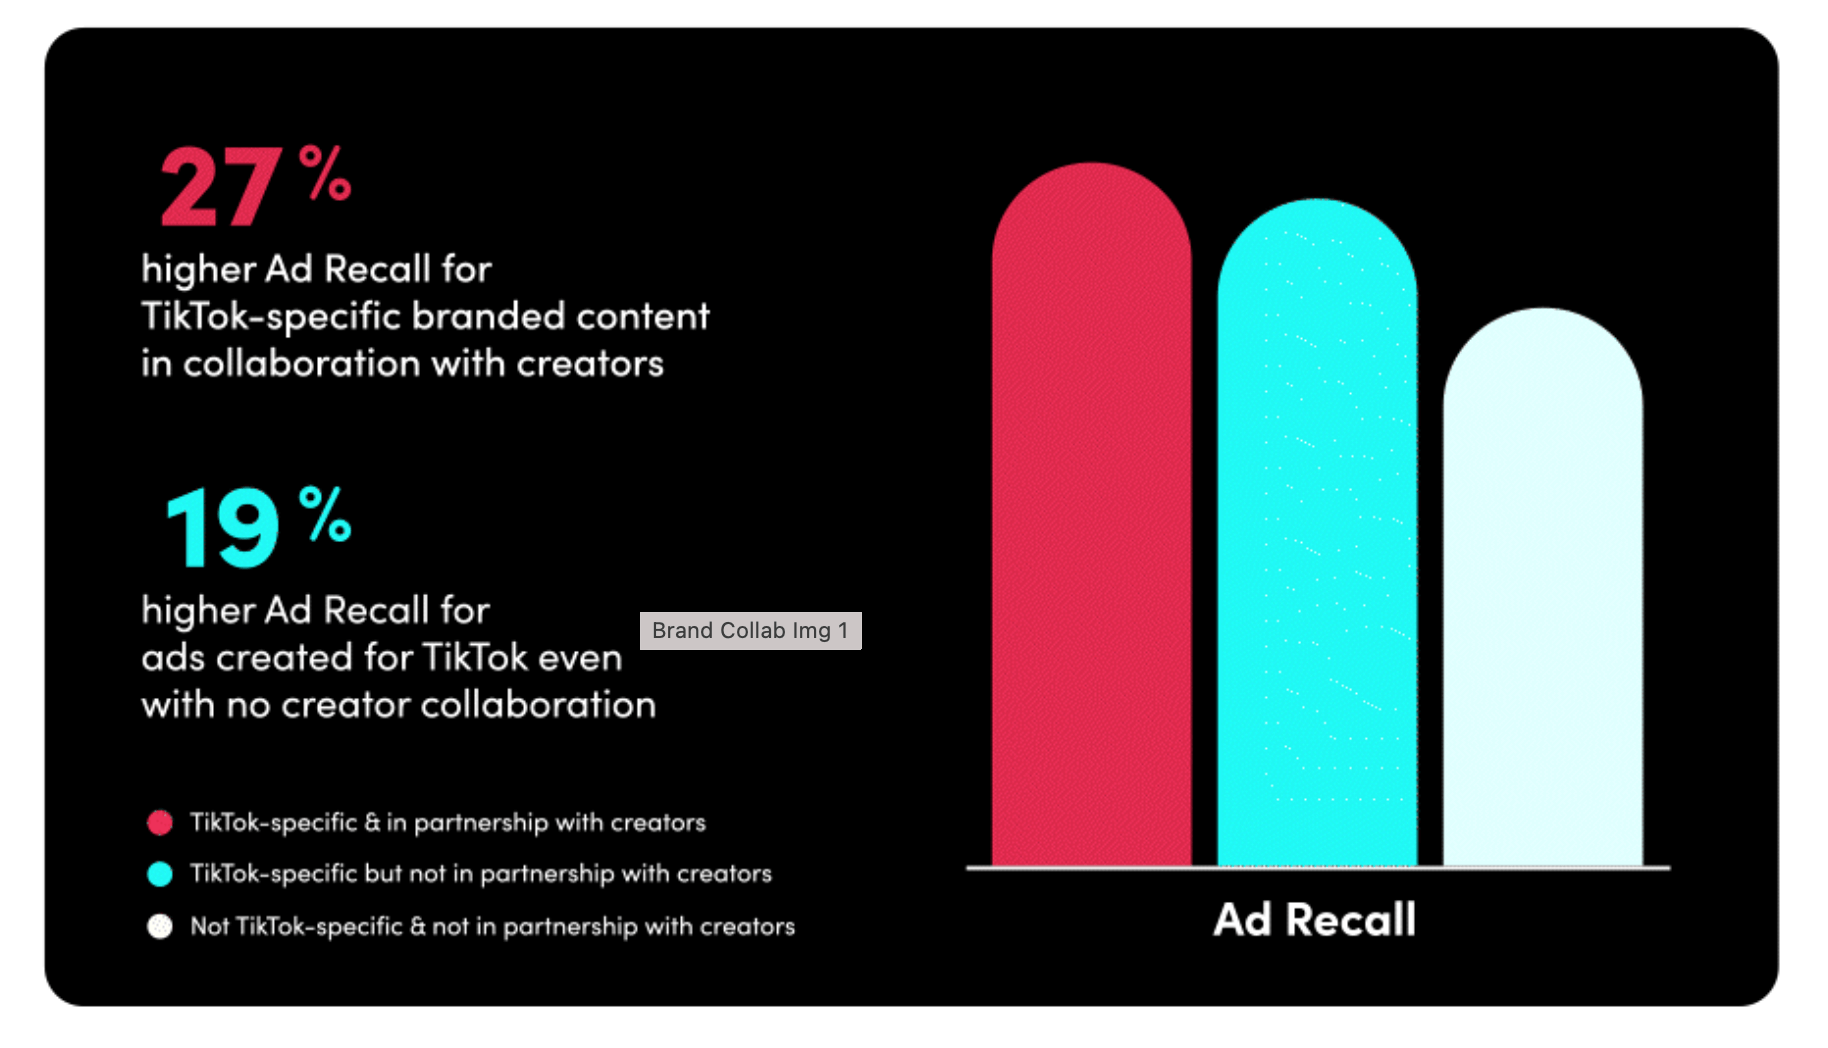 Collab impact for brands in TikTok